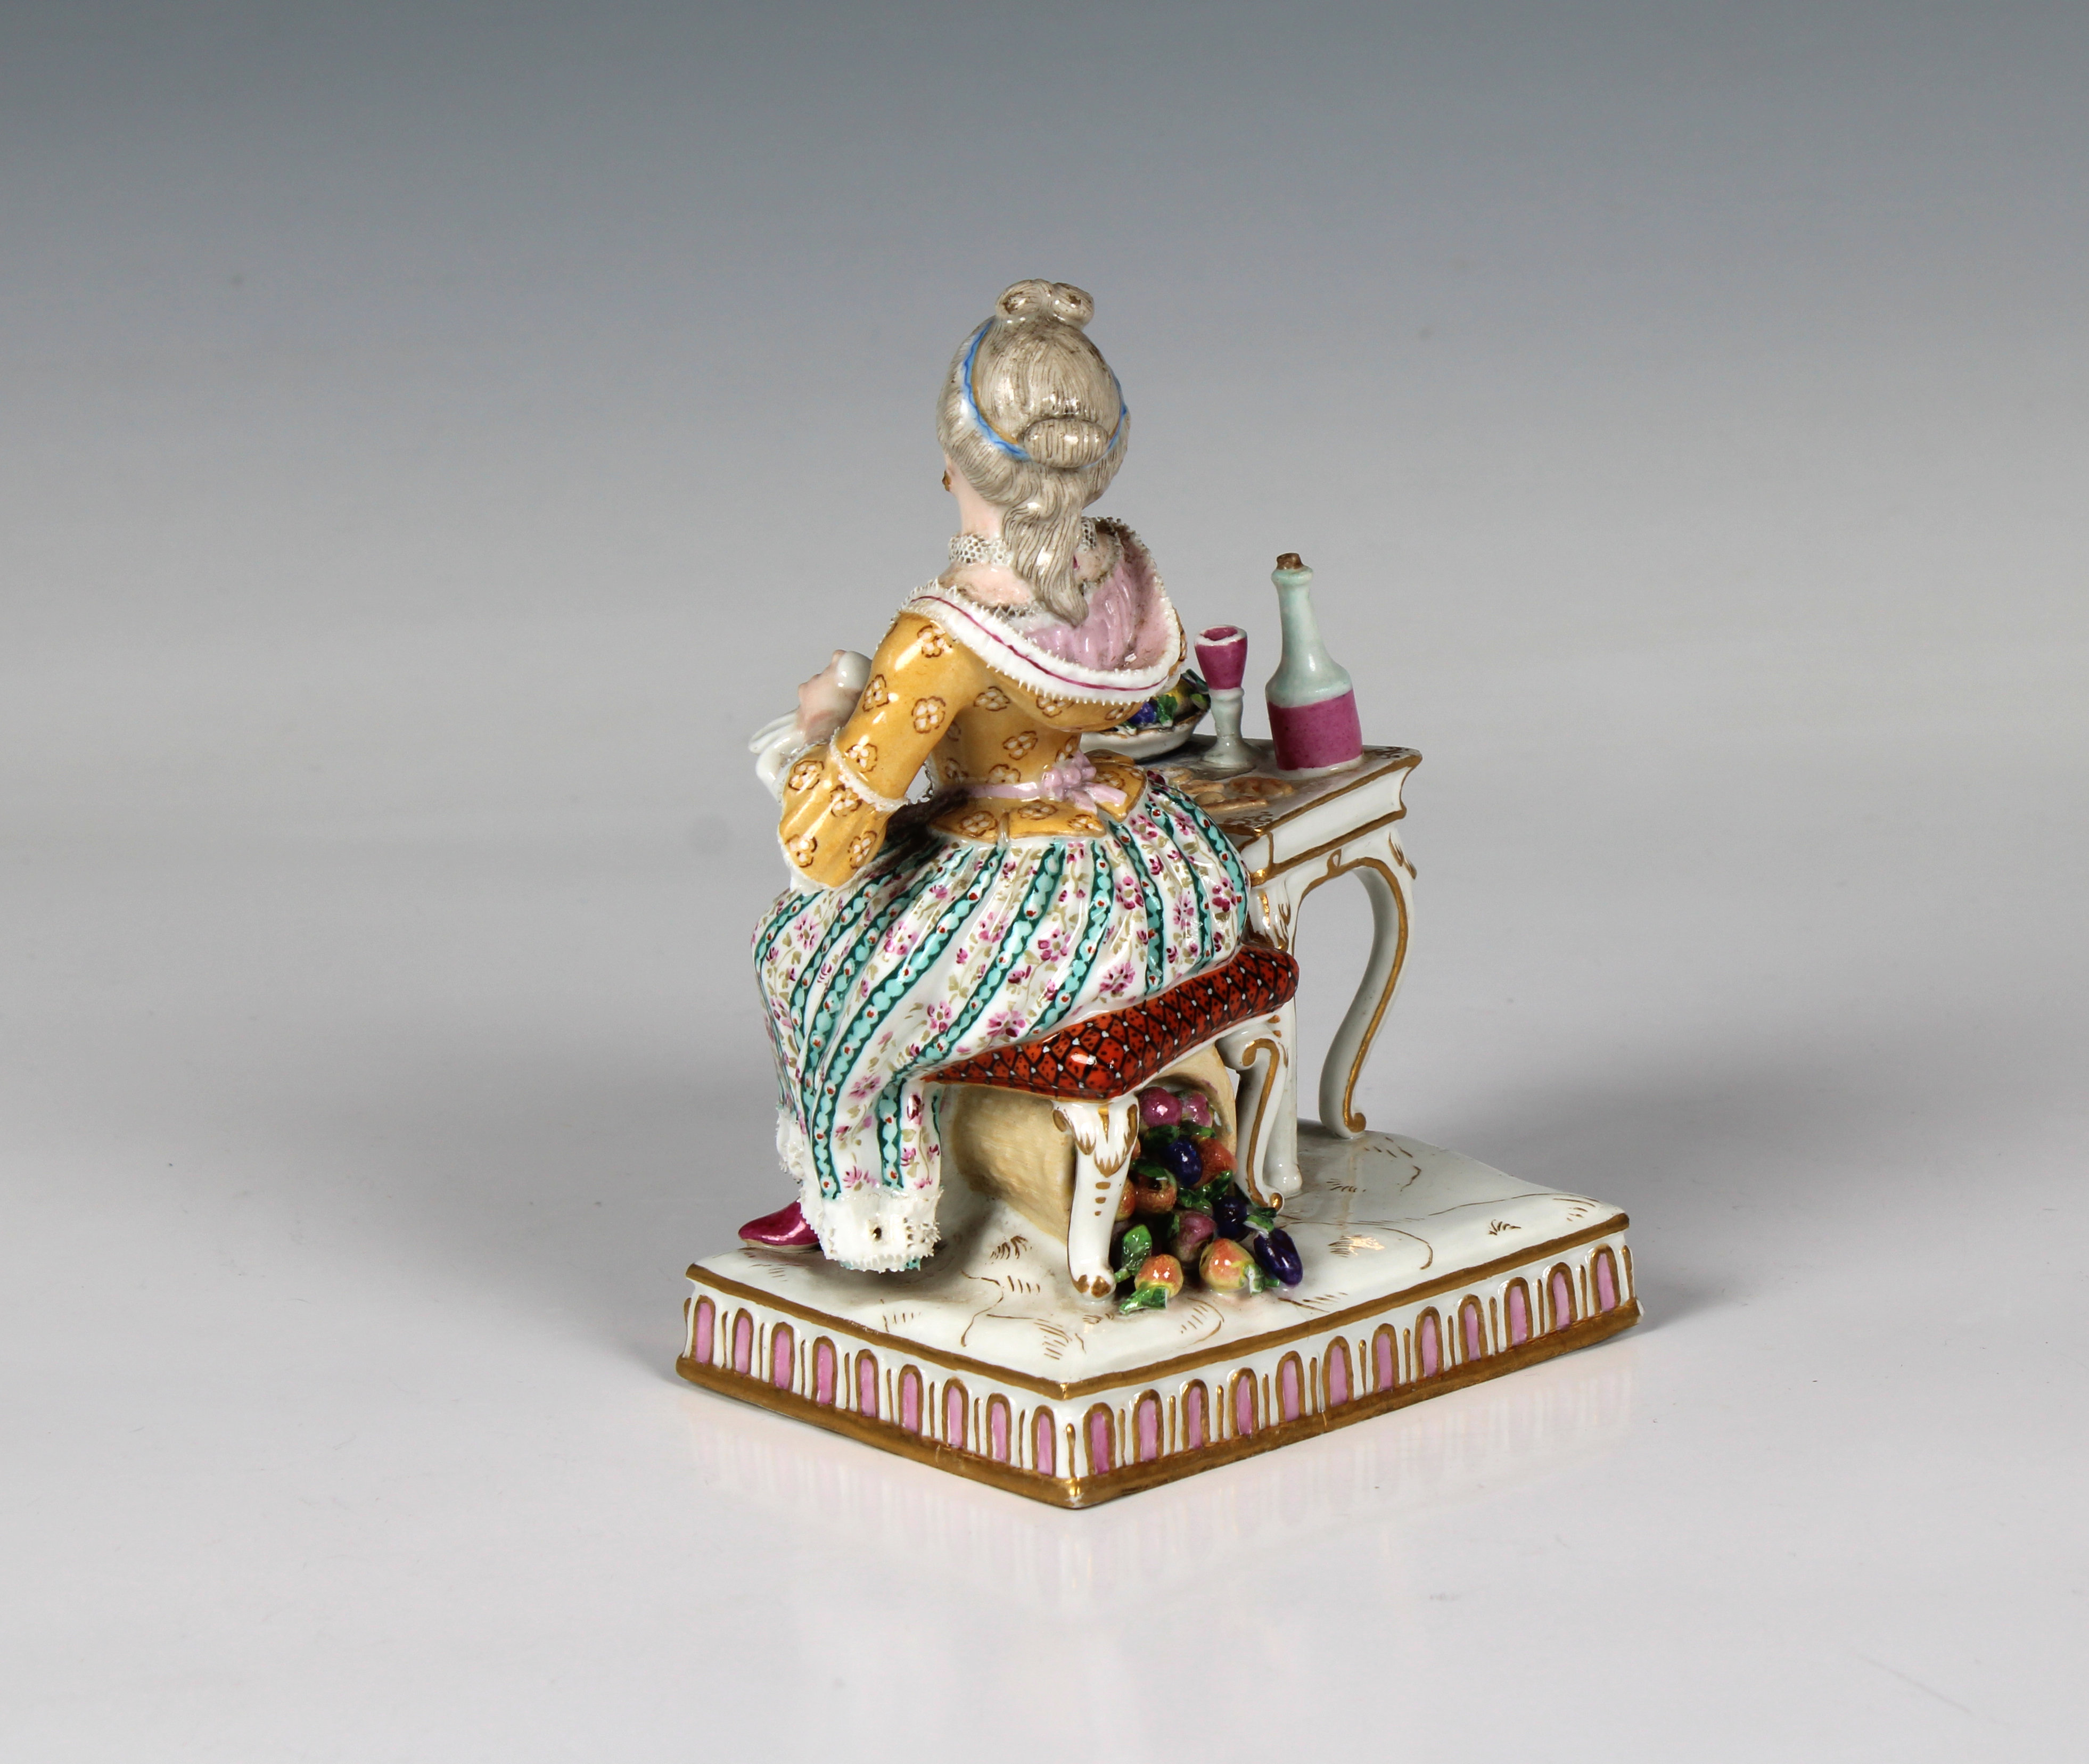 A Meissen porcelain figure of a seated lady taking tea - Image 4 of 5